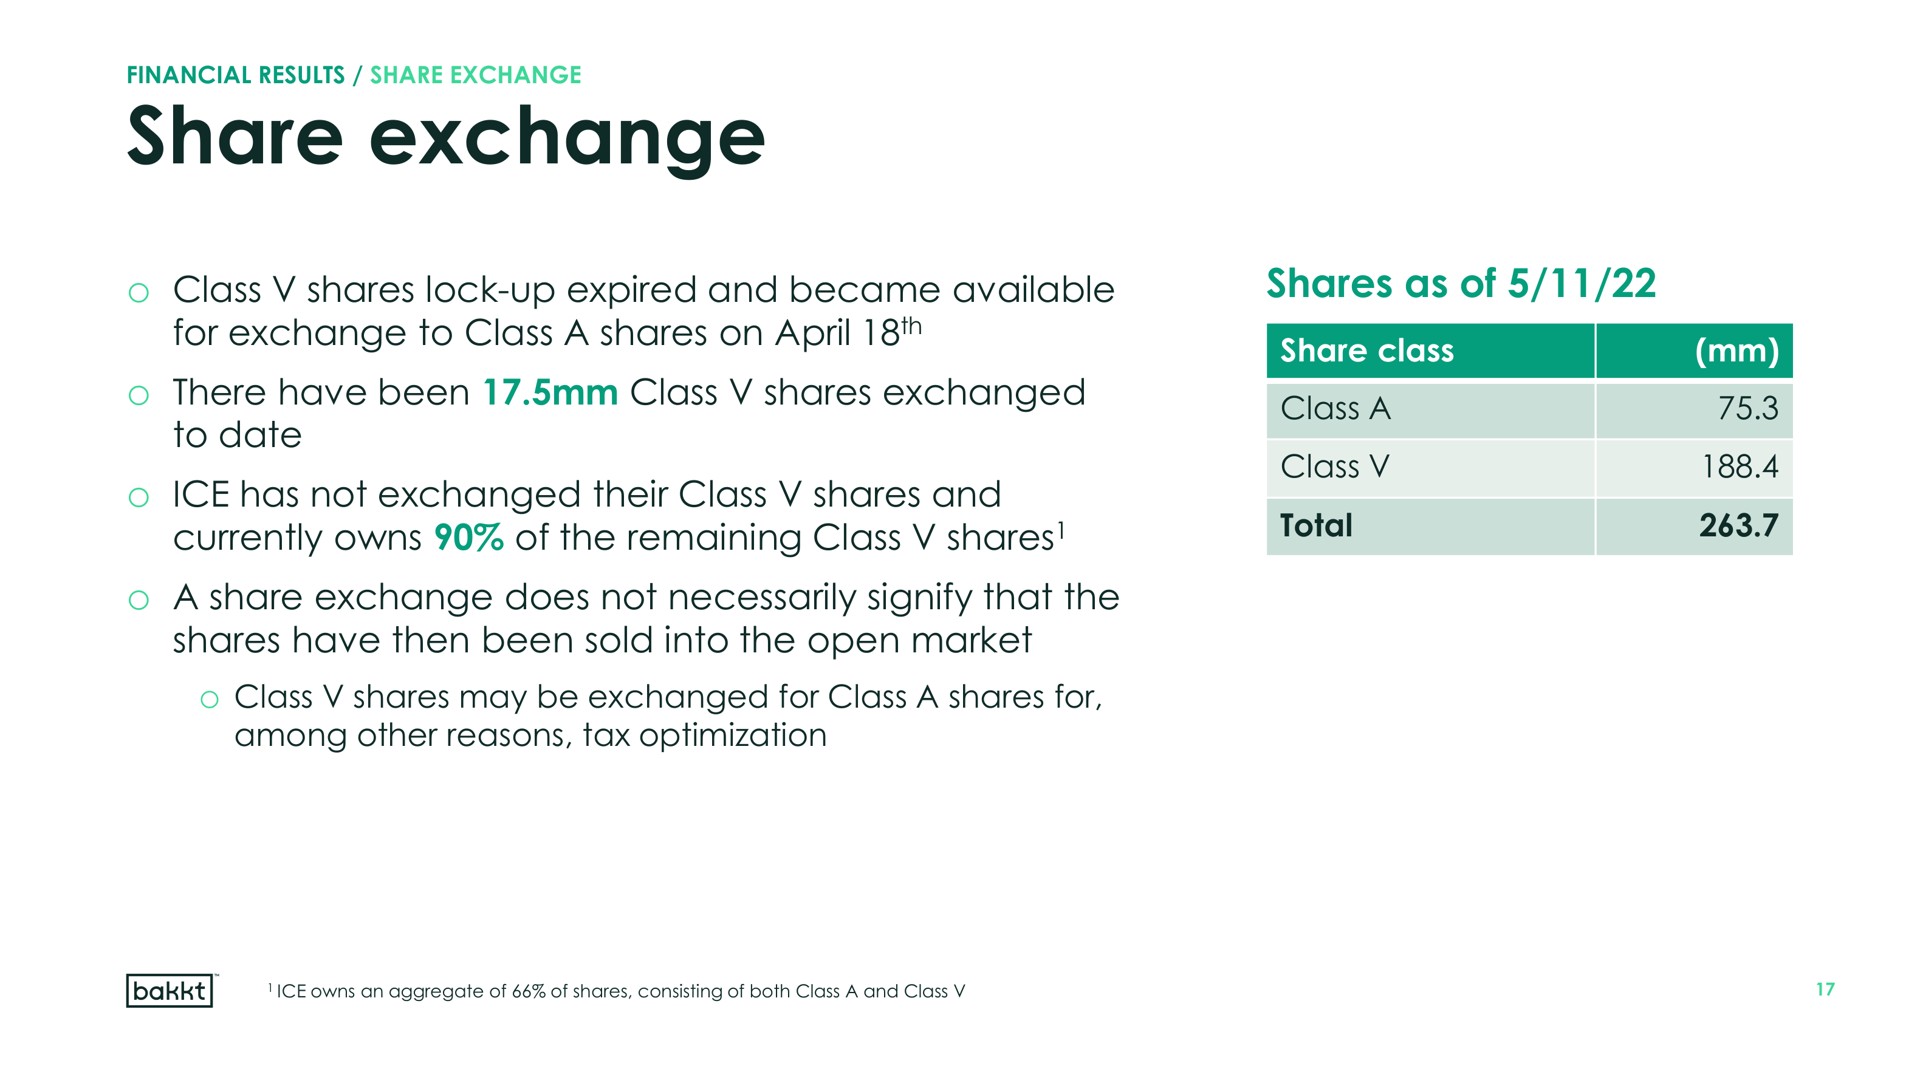 share exchange shares as of class lock up expired and became available | Bakkt